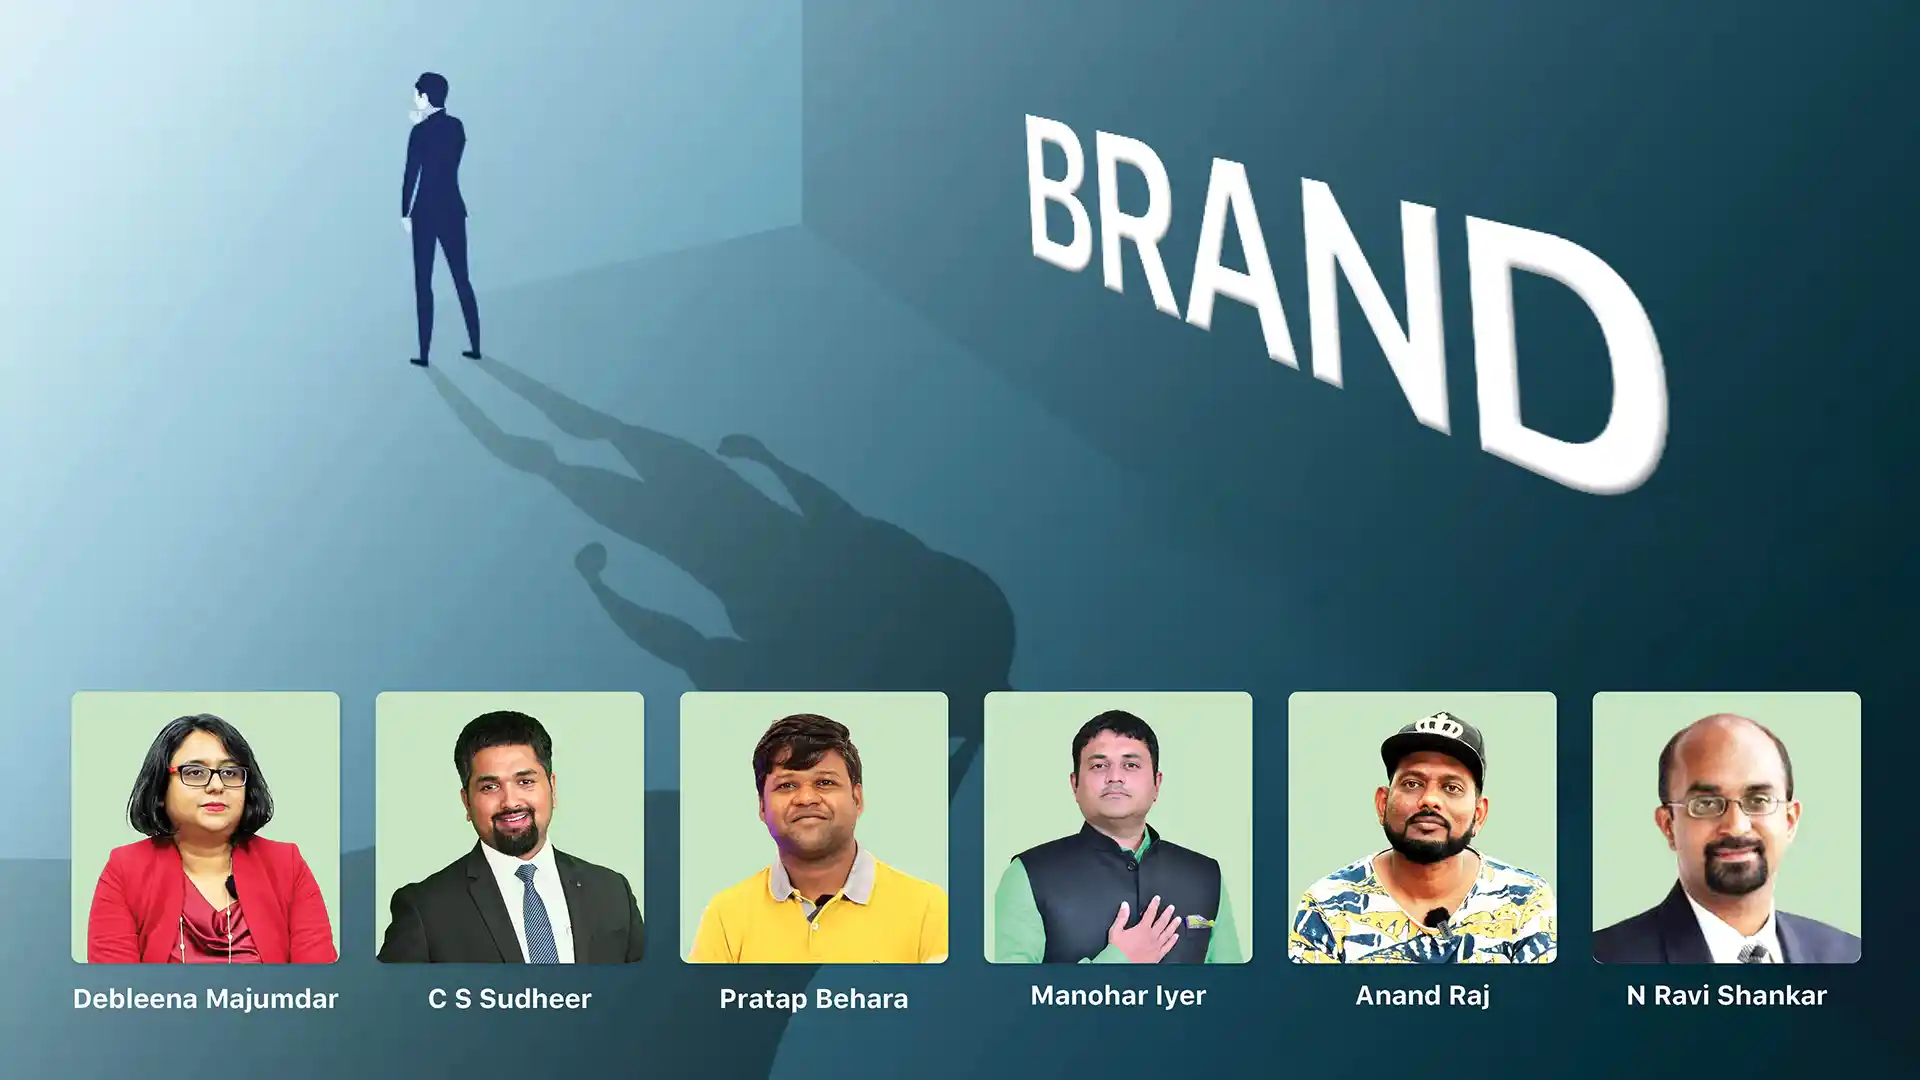 Course Trailer: Building a Brand - A Complete Guide. Watch to know more.